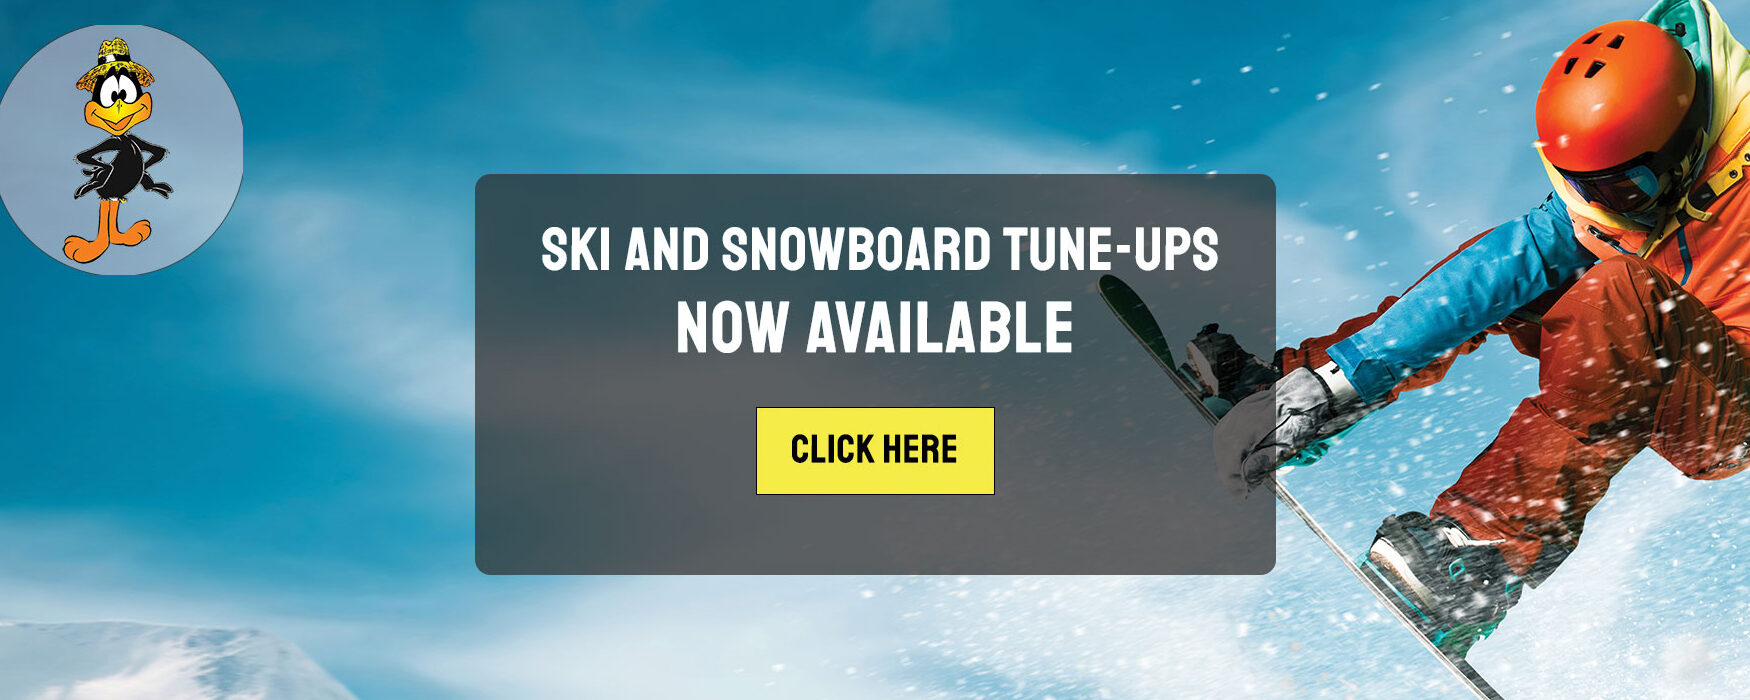 Snowboard Tuneups now available